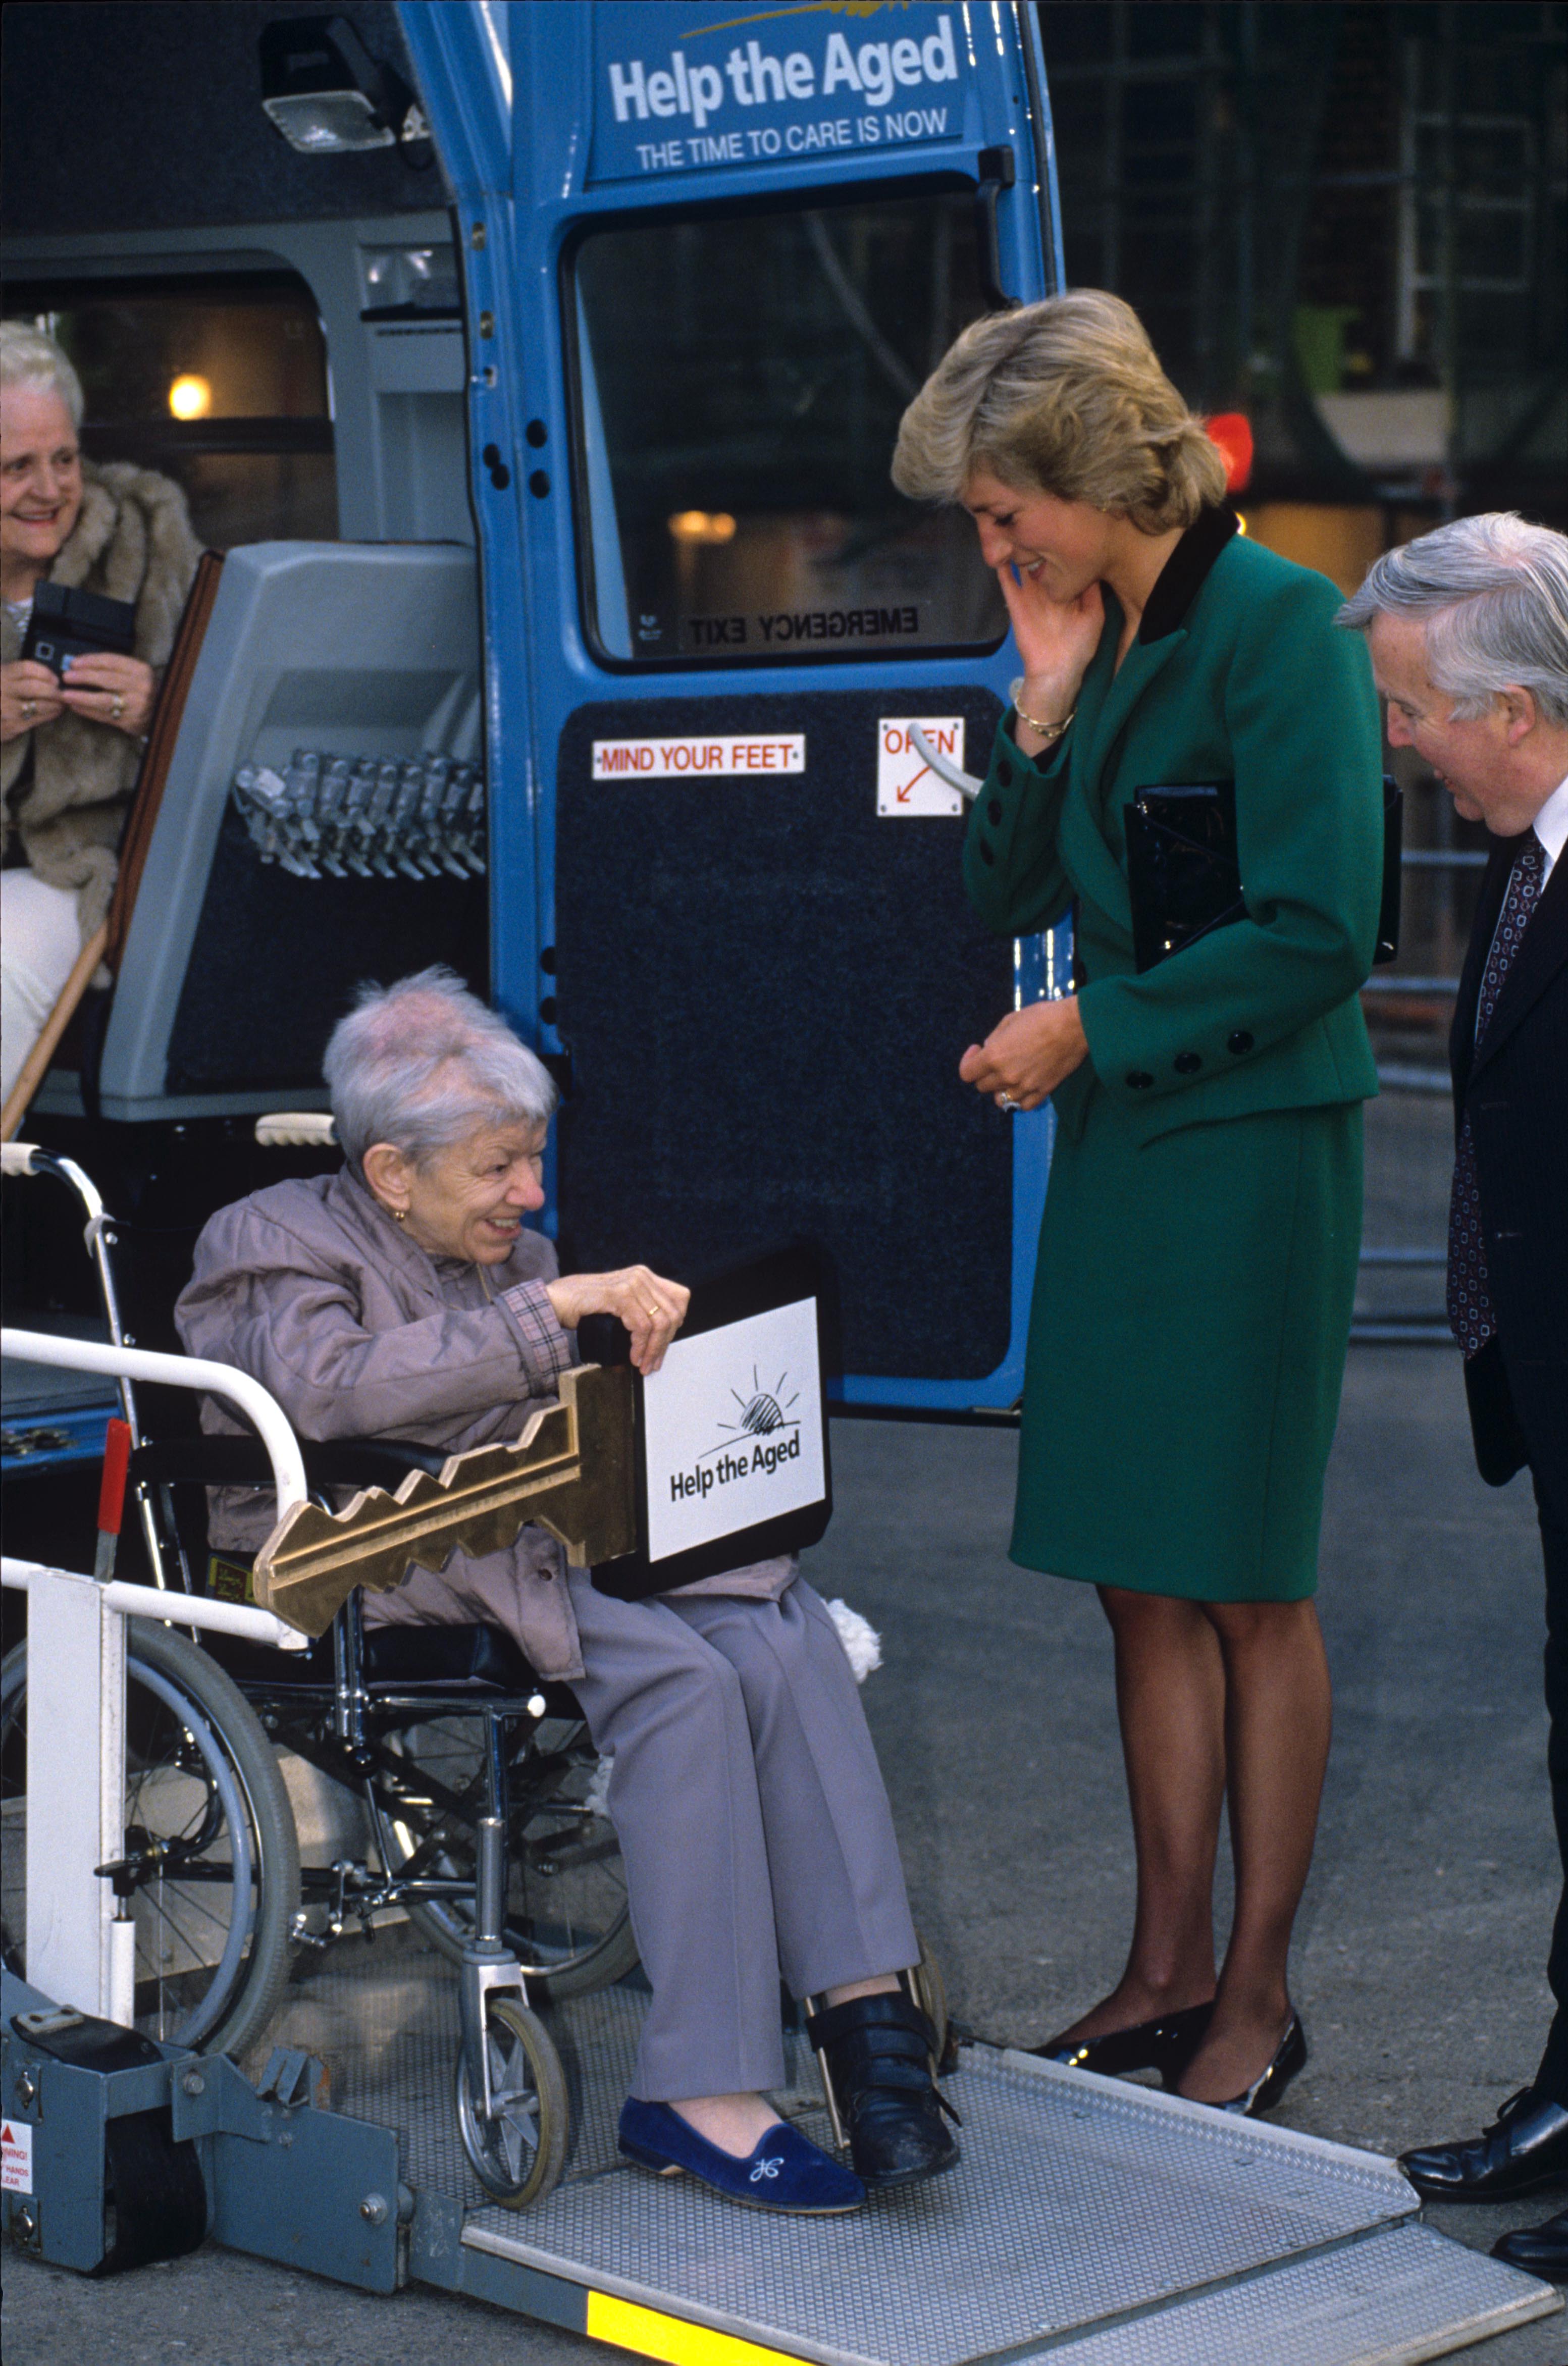 Princess Diana pictured visiting Help the Aged Charity in London in 1989.